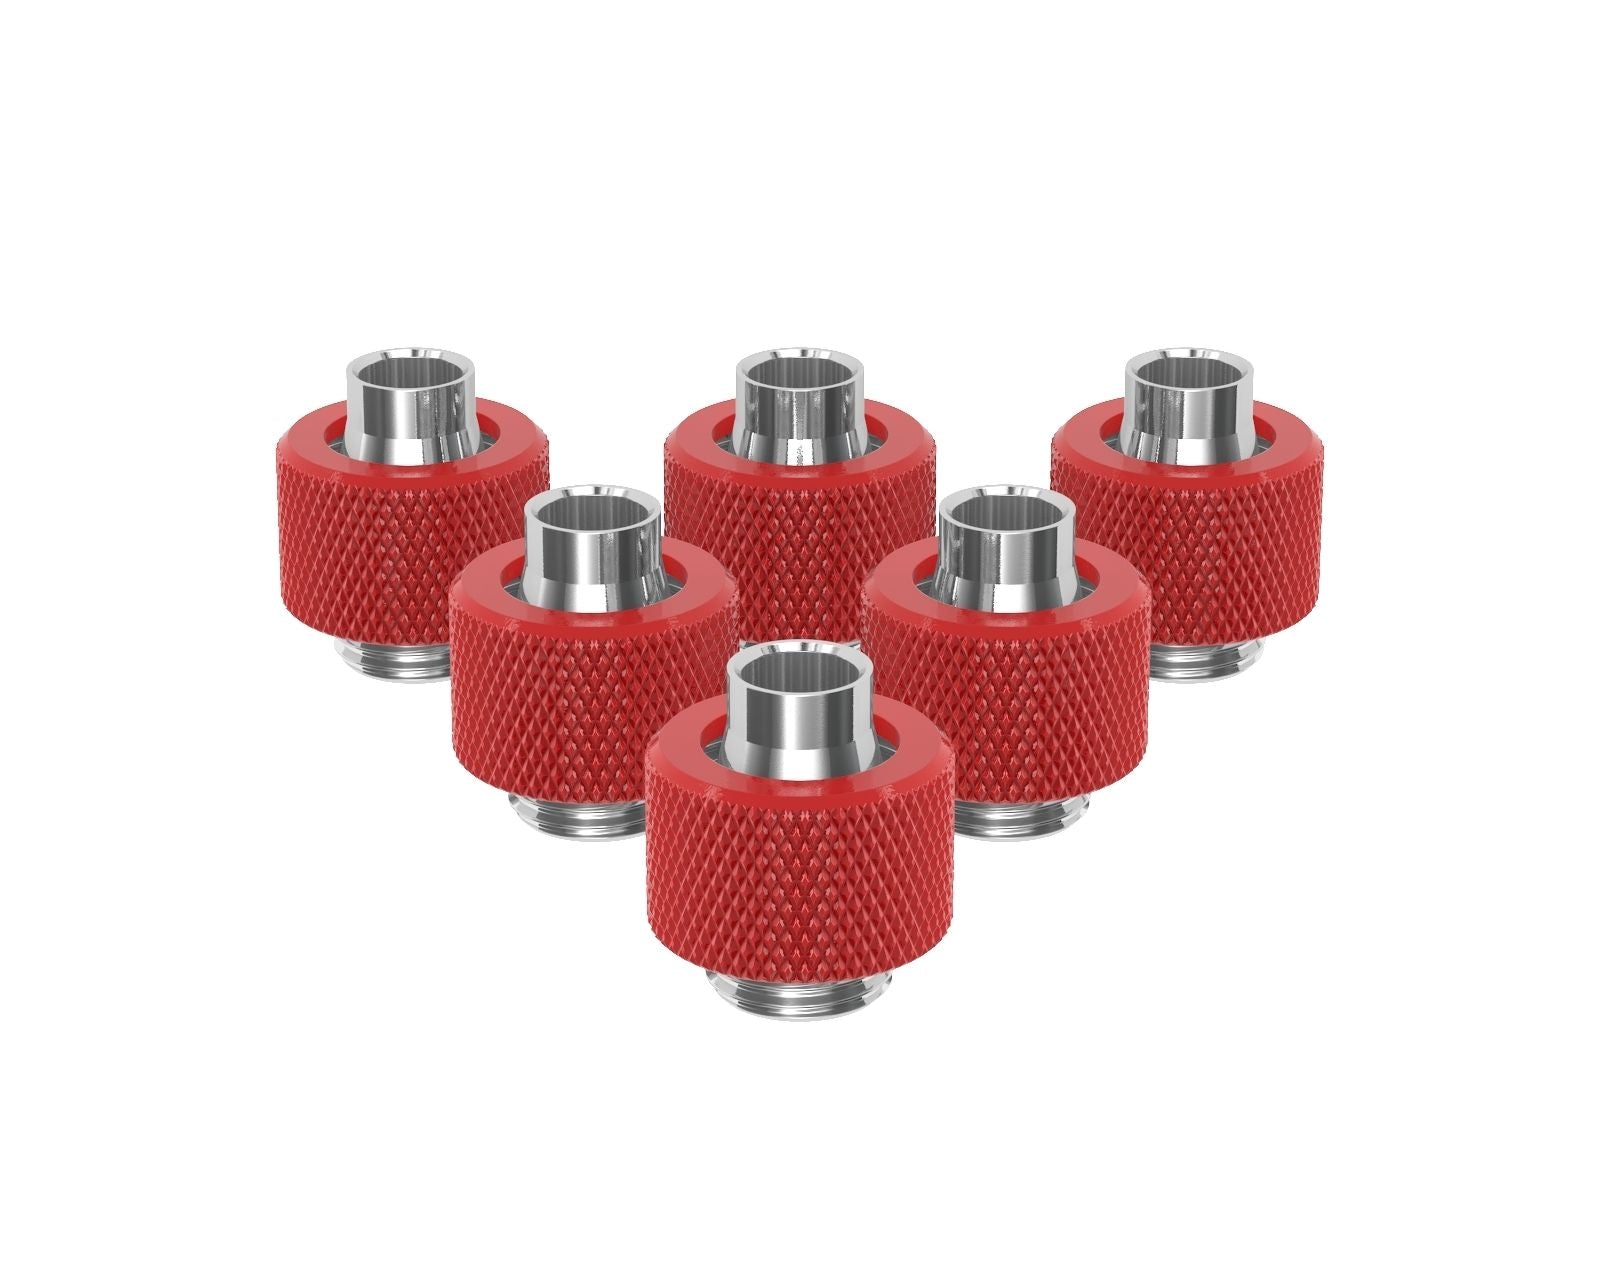 PrimoChill SecureFit SX - Premium Compression Fitting For 3/8in ID x 1/2in OD Flexible Tubing 6 Pack (F-SFSX12-6) - Available in 20+ Colors, Custom Watercooling Loop Ready - Razor Red